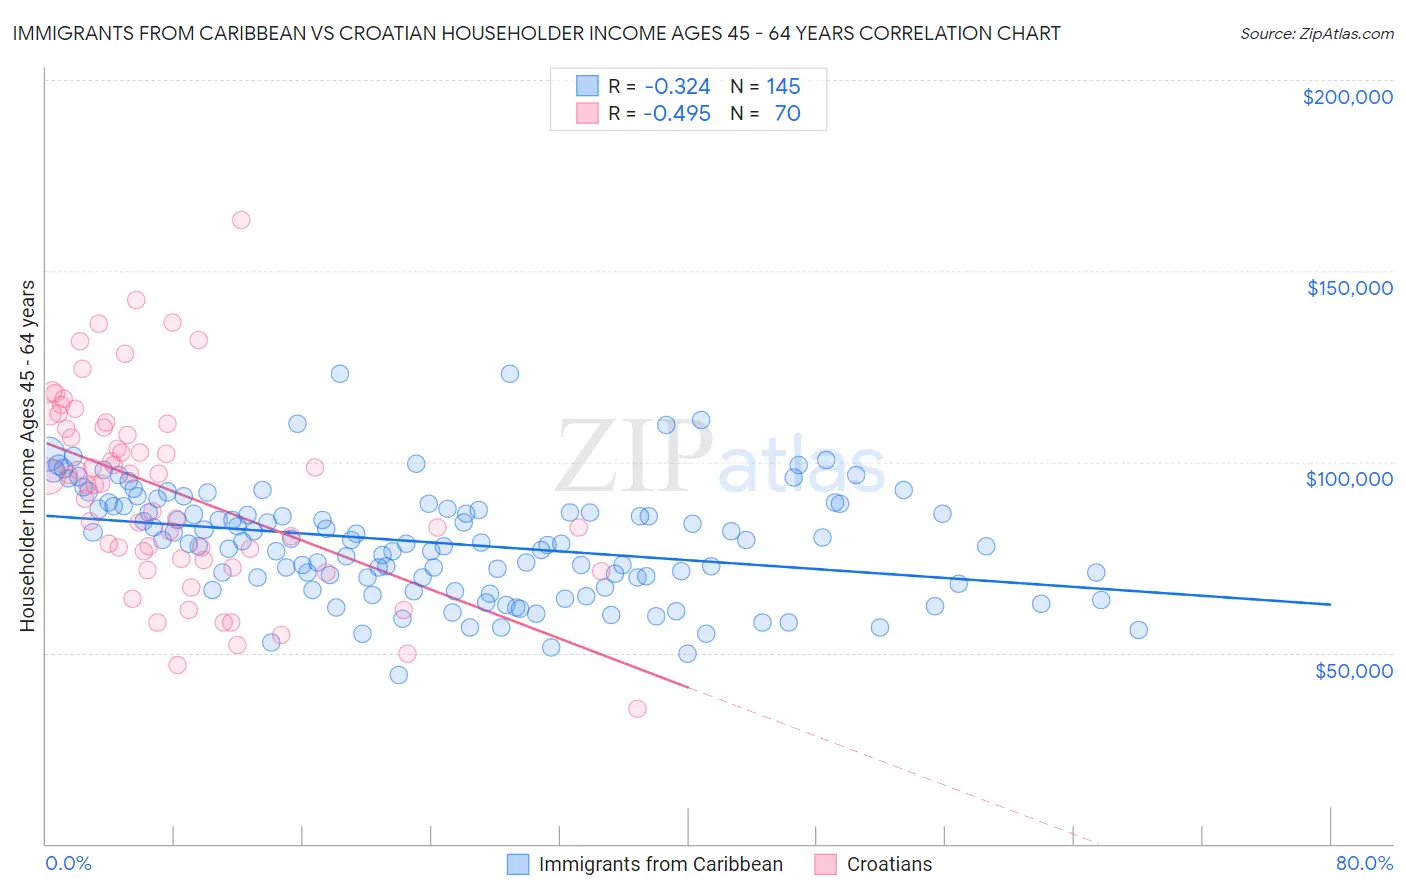 Immigrants from Caribbean vs Croatian Householder Income Ages 45 - 64 years